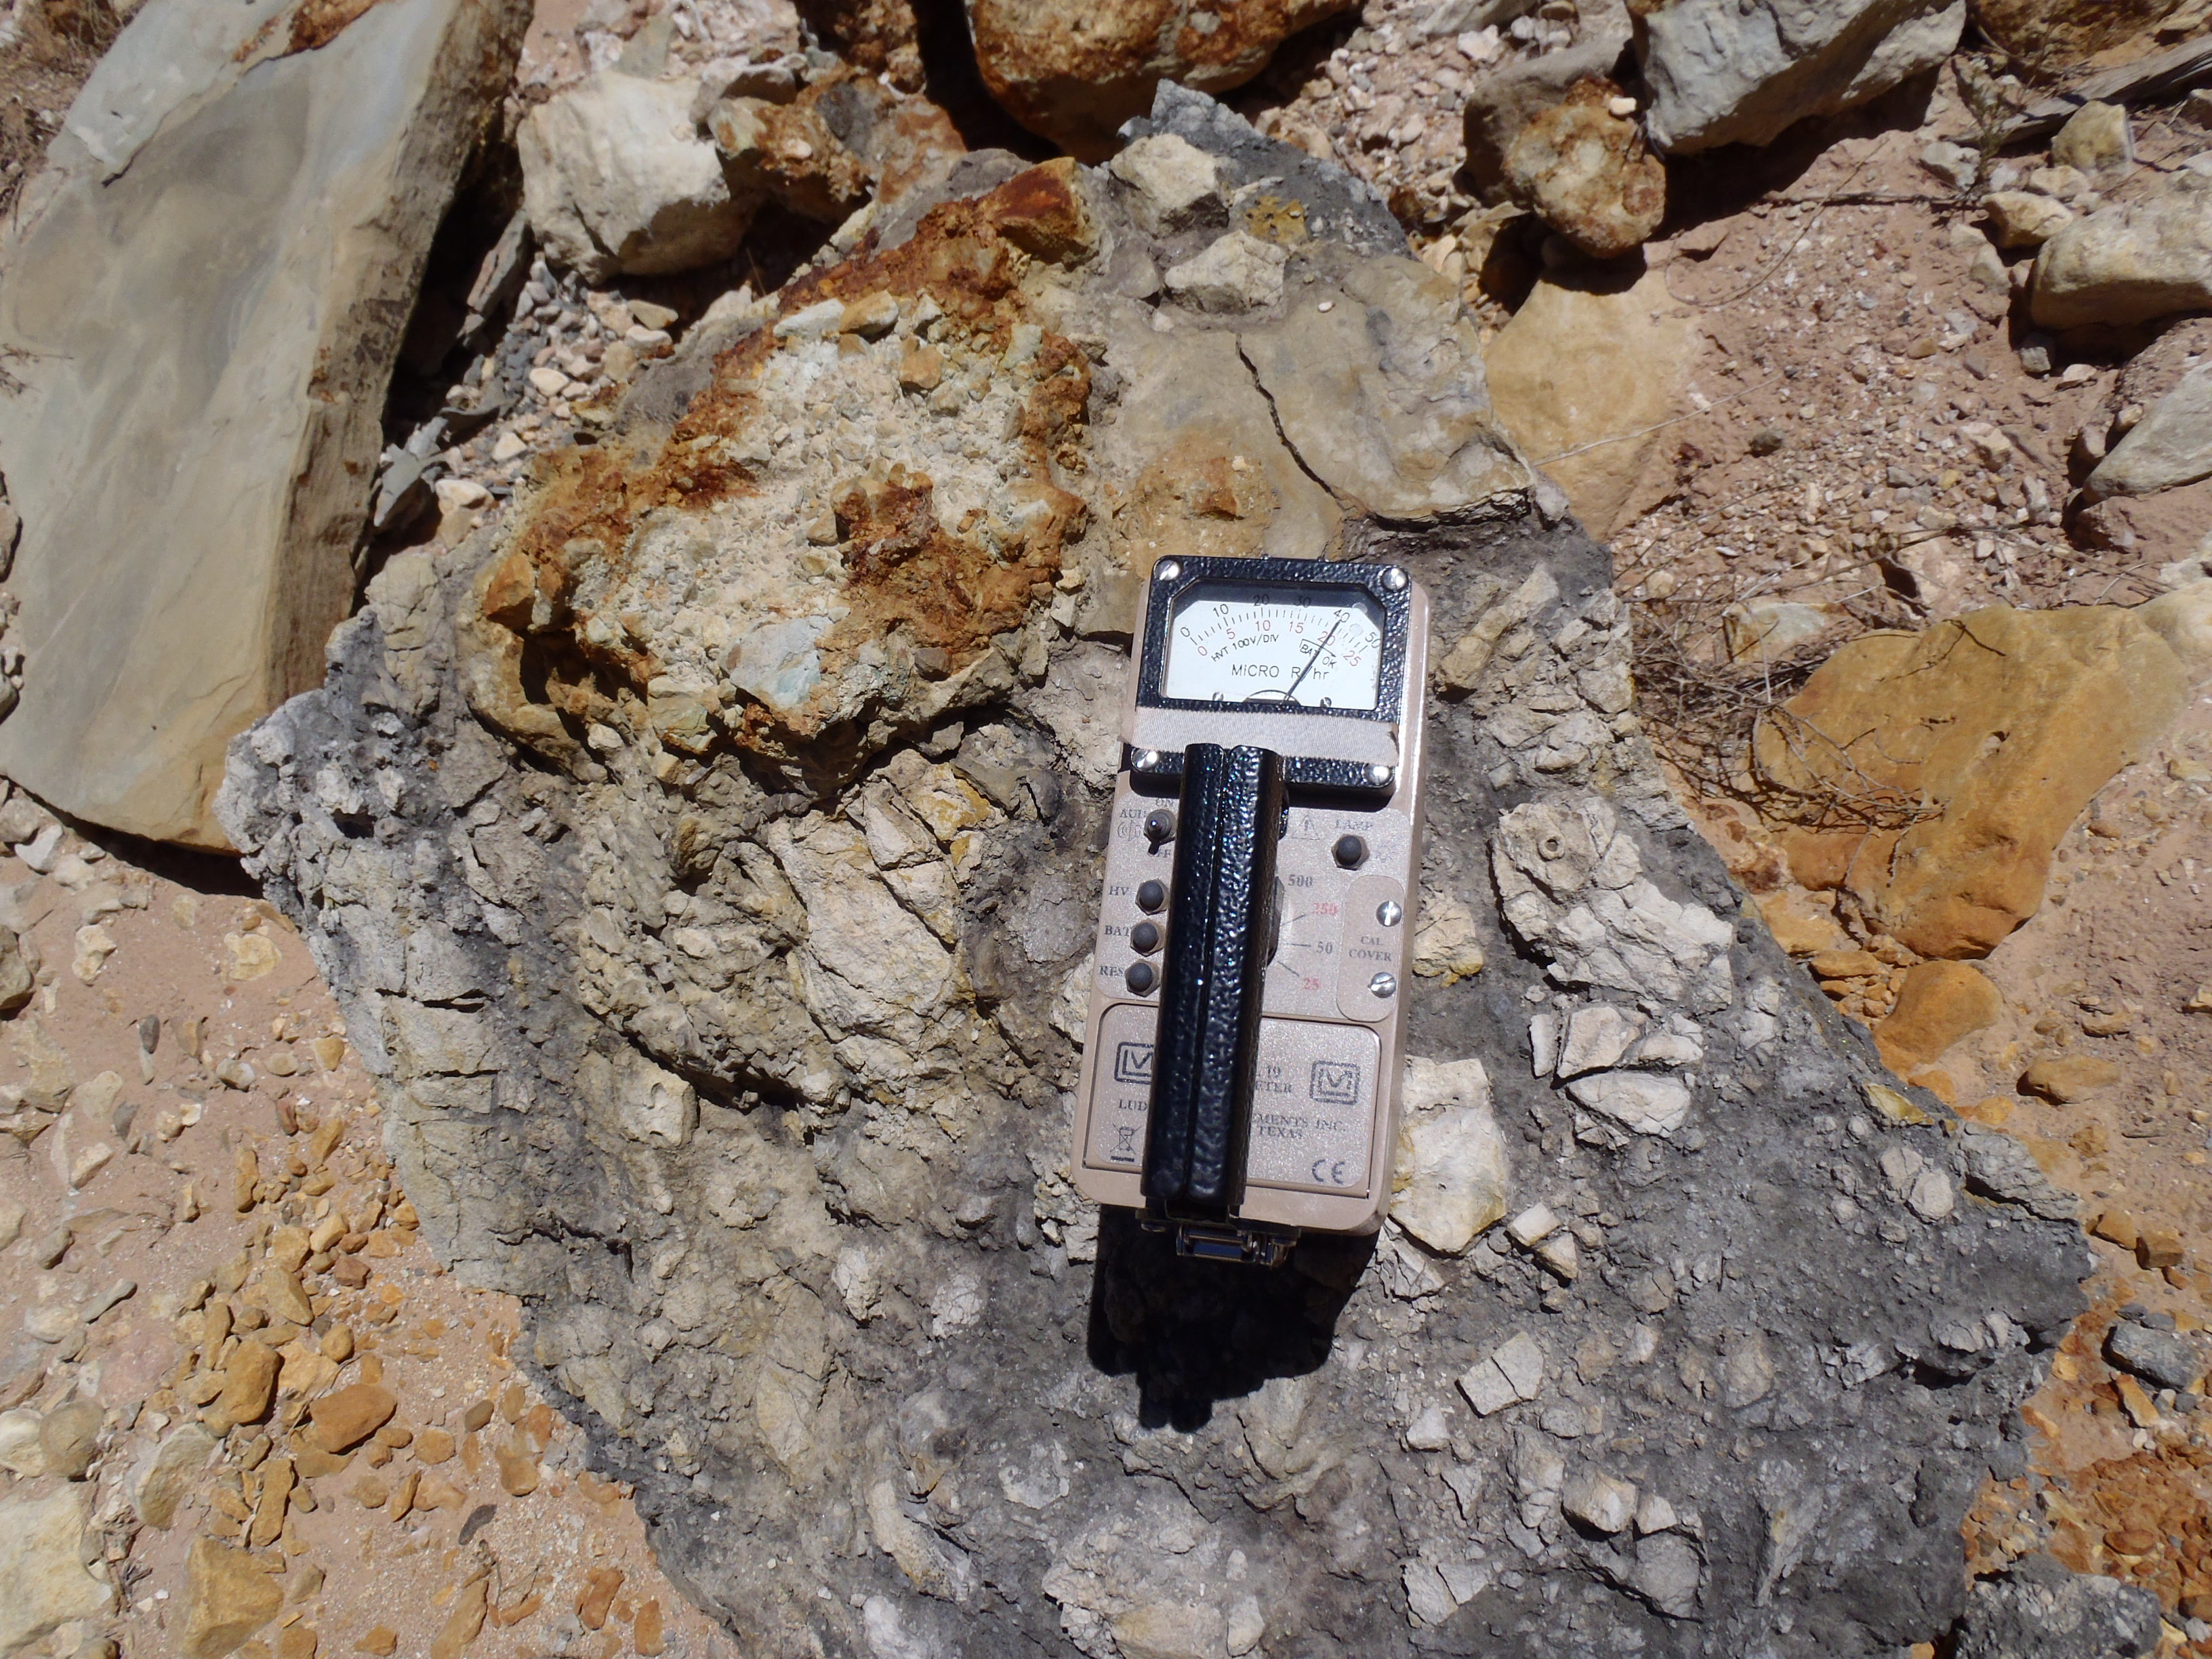  View of gray/black boulder containing multiple smaller boulders with a Ludlum Model 19, Micro R reader registering a reading of 500 micro R per hour on the 0-500 scale of the meter. 